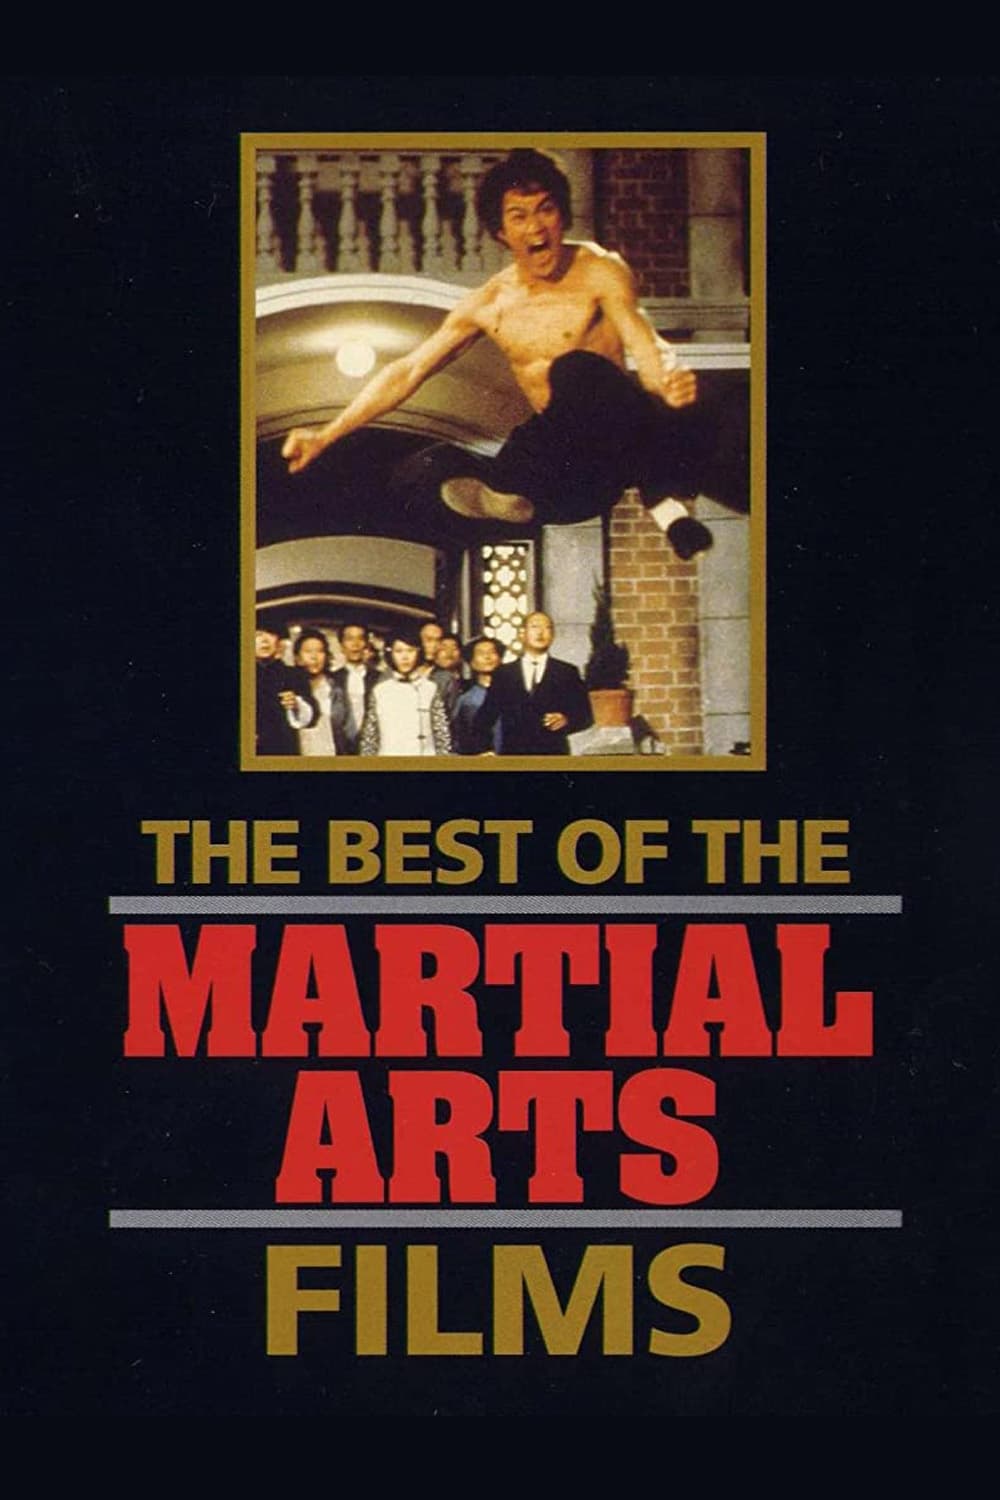 The Best of the Martial Arts Films film